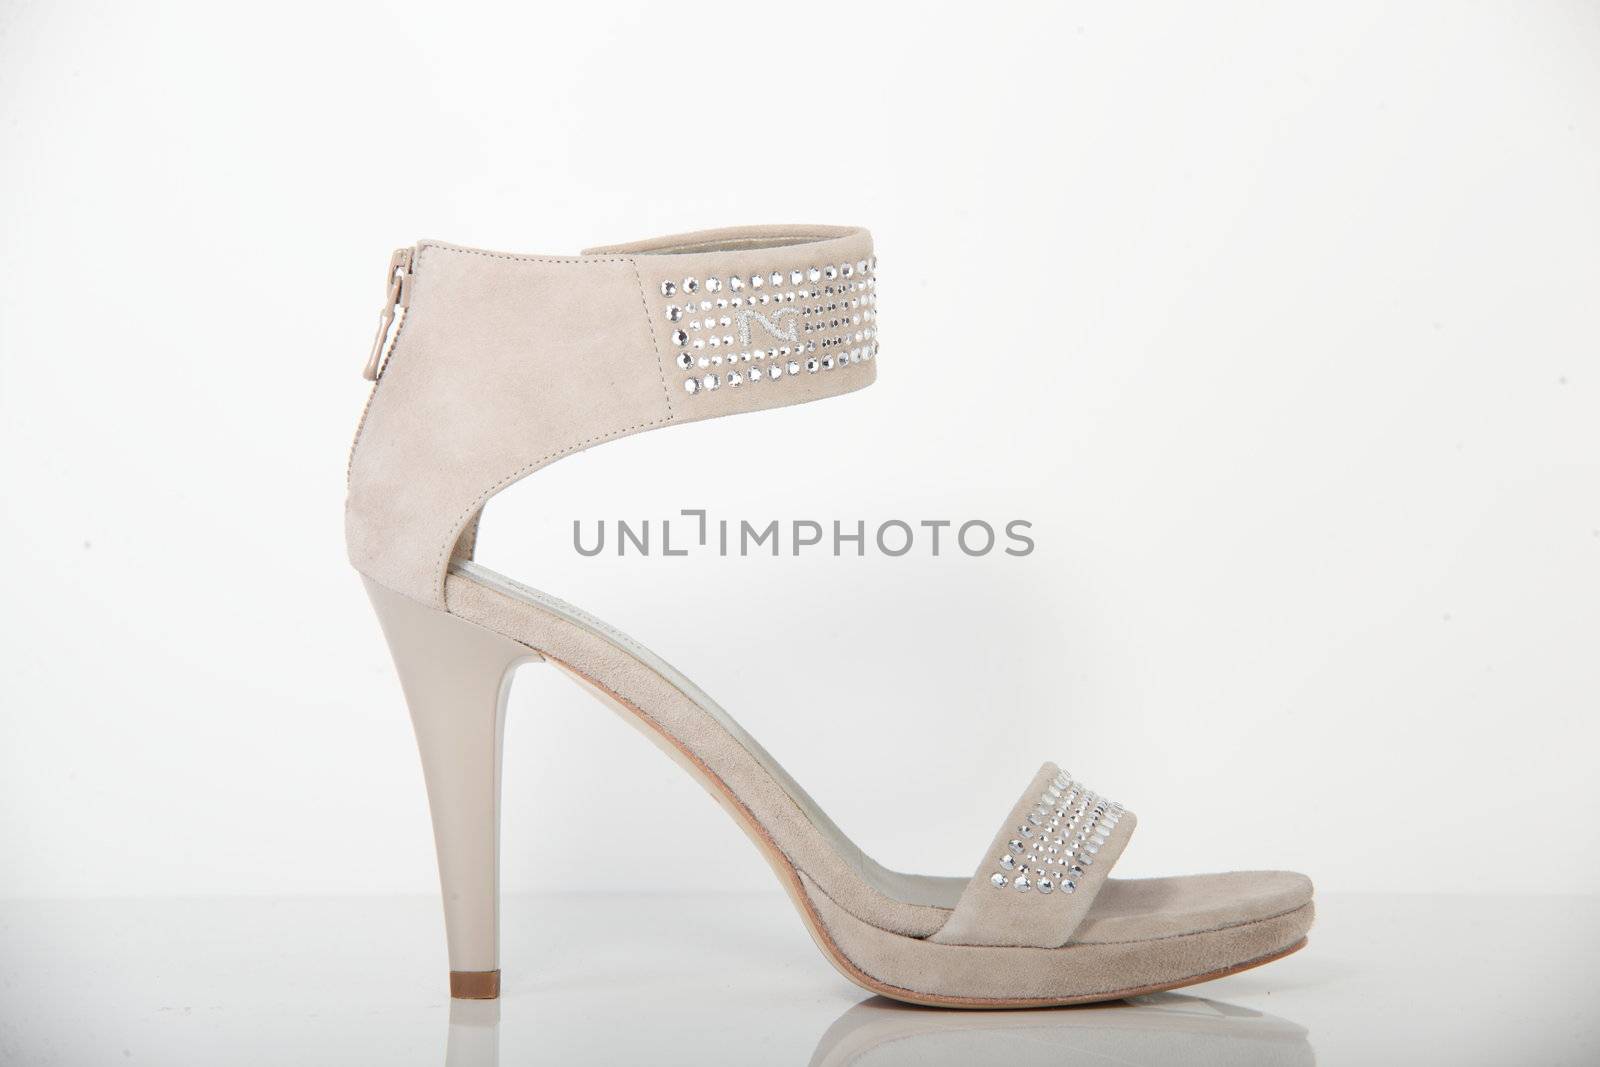 woman shoes on white background by fiphoto